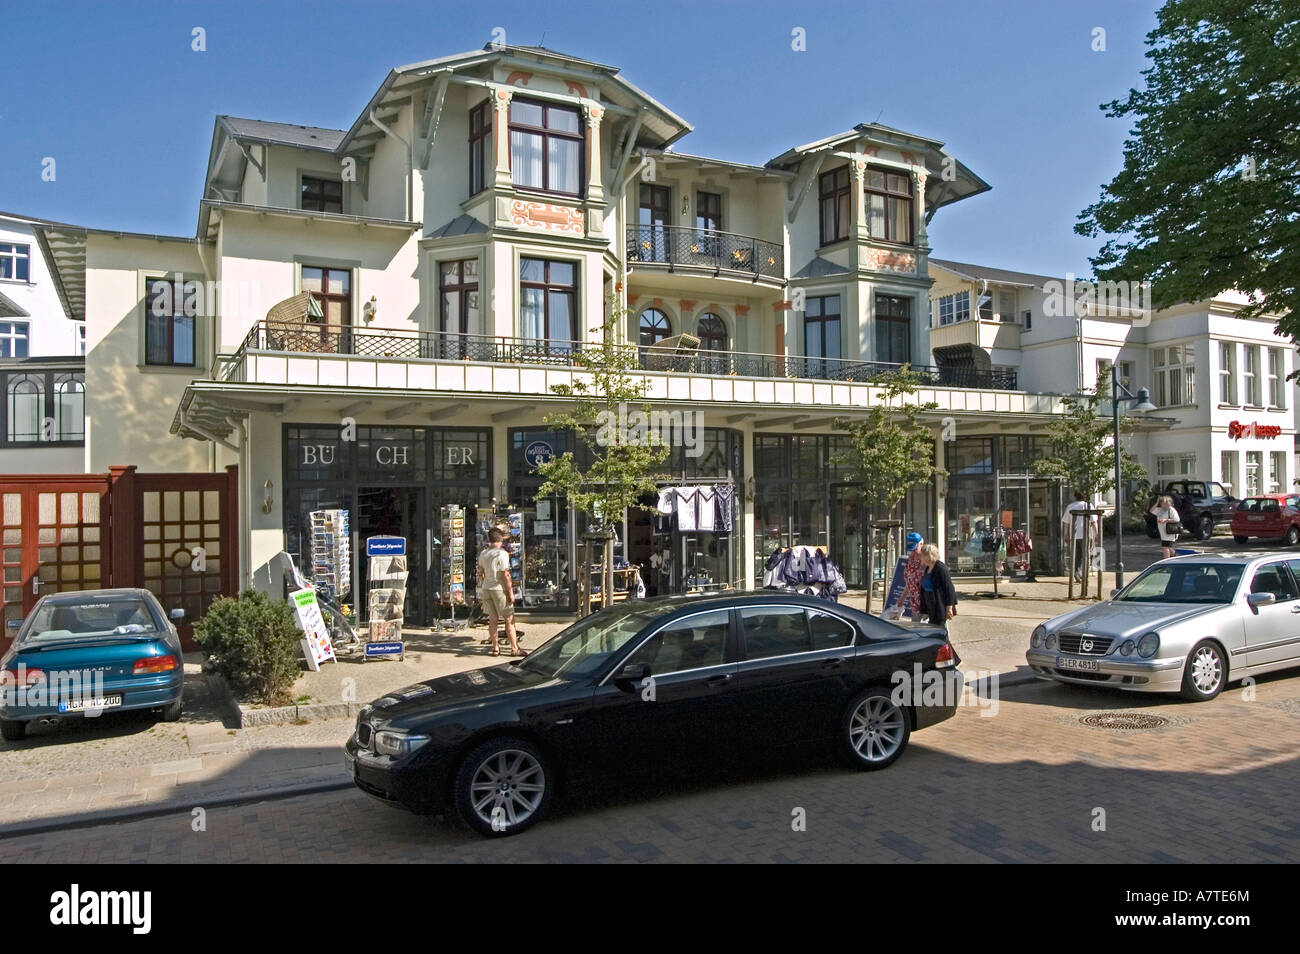 Cars in front of building Ahlbeck Uecker-Randow Mecklenburg-Vorpommern Germany Stock Photo